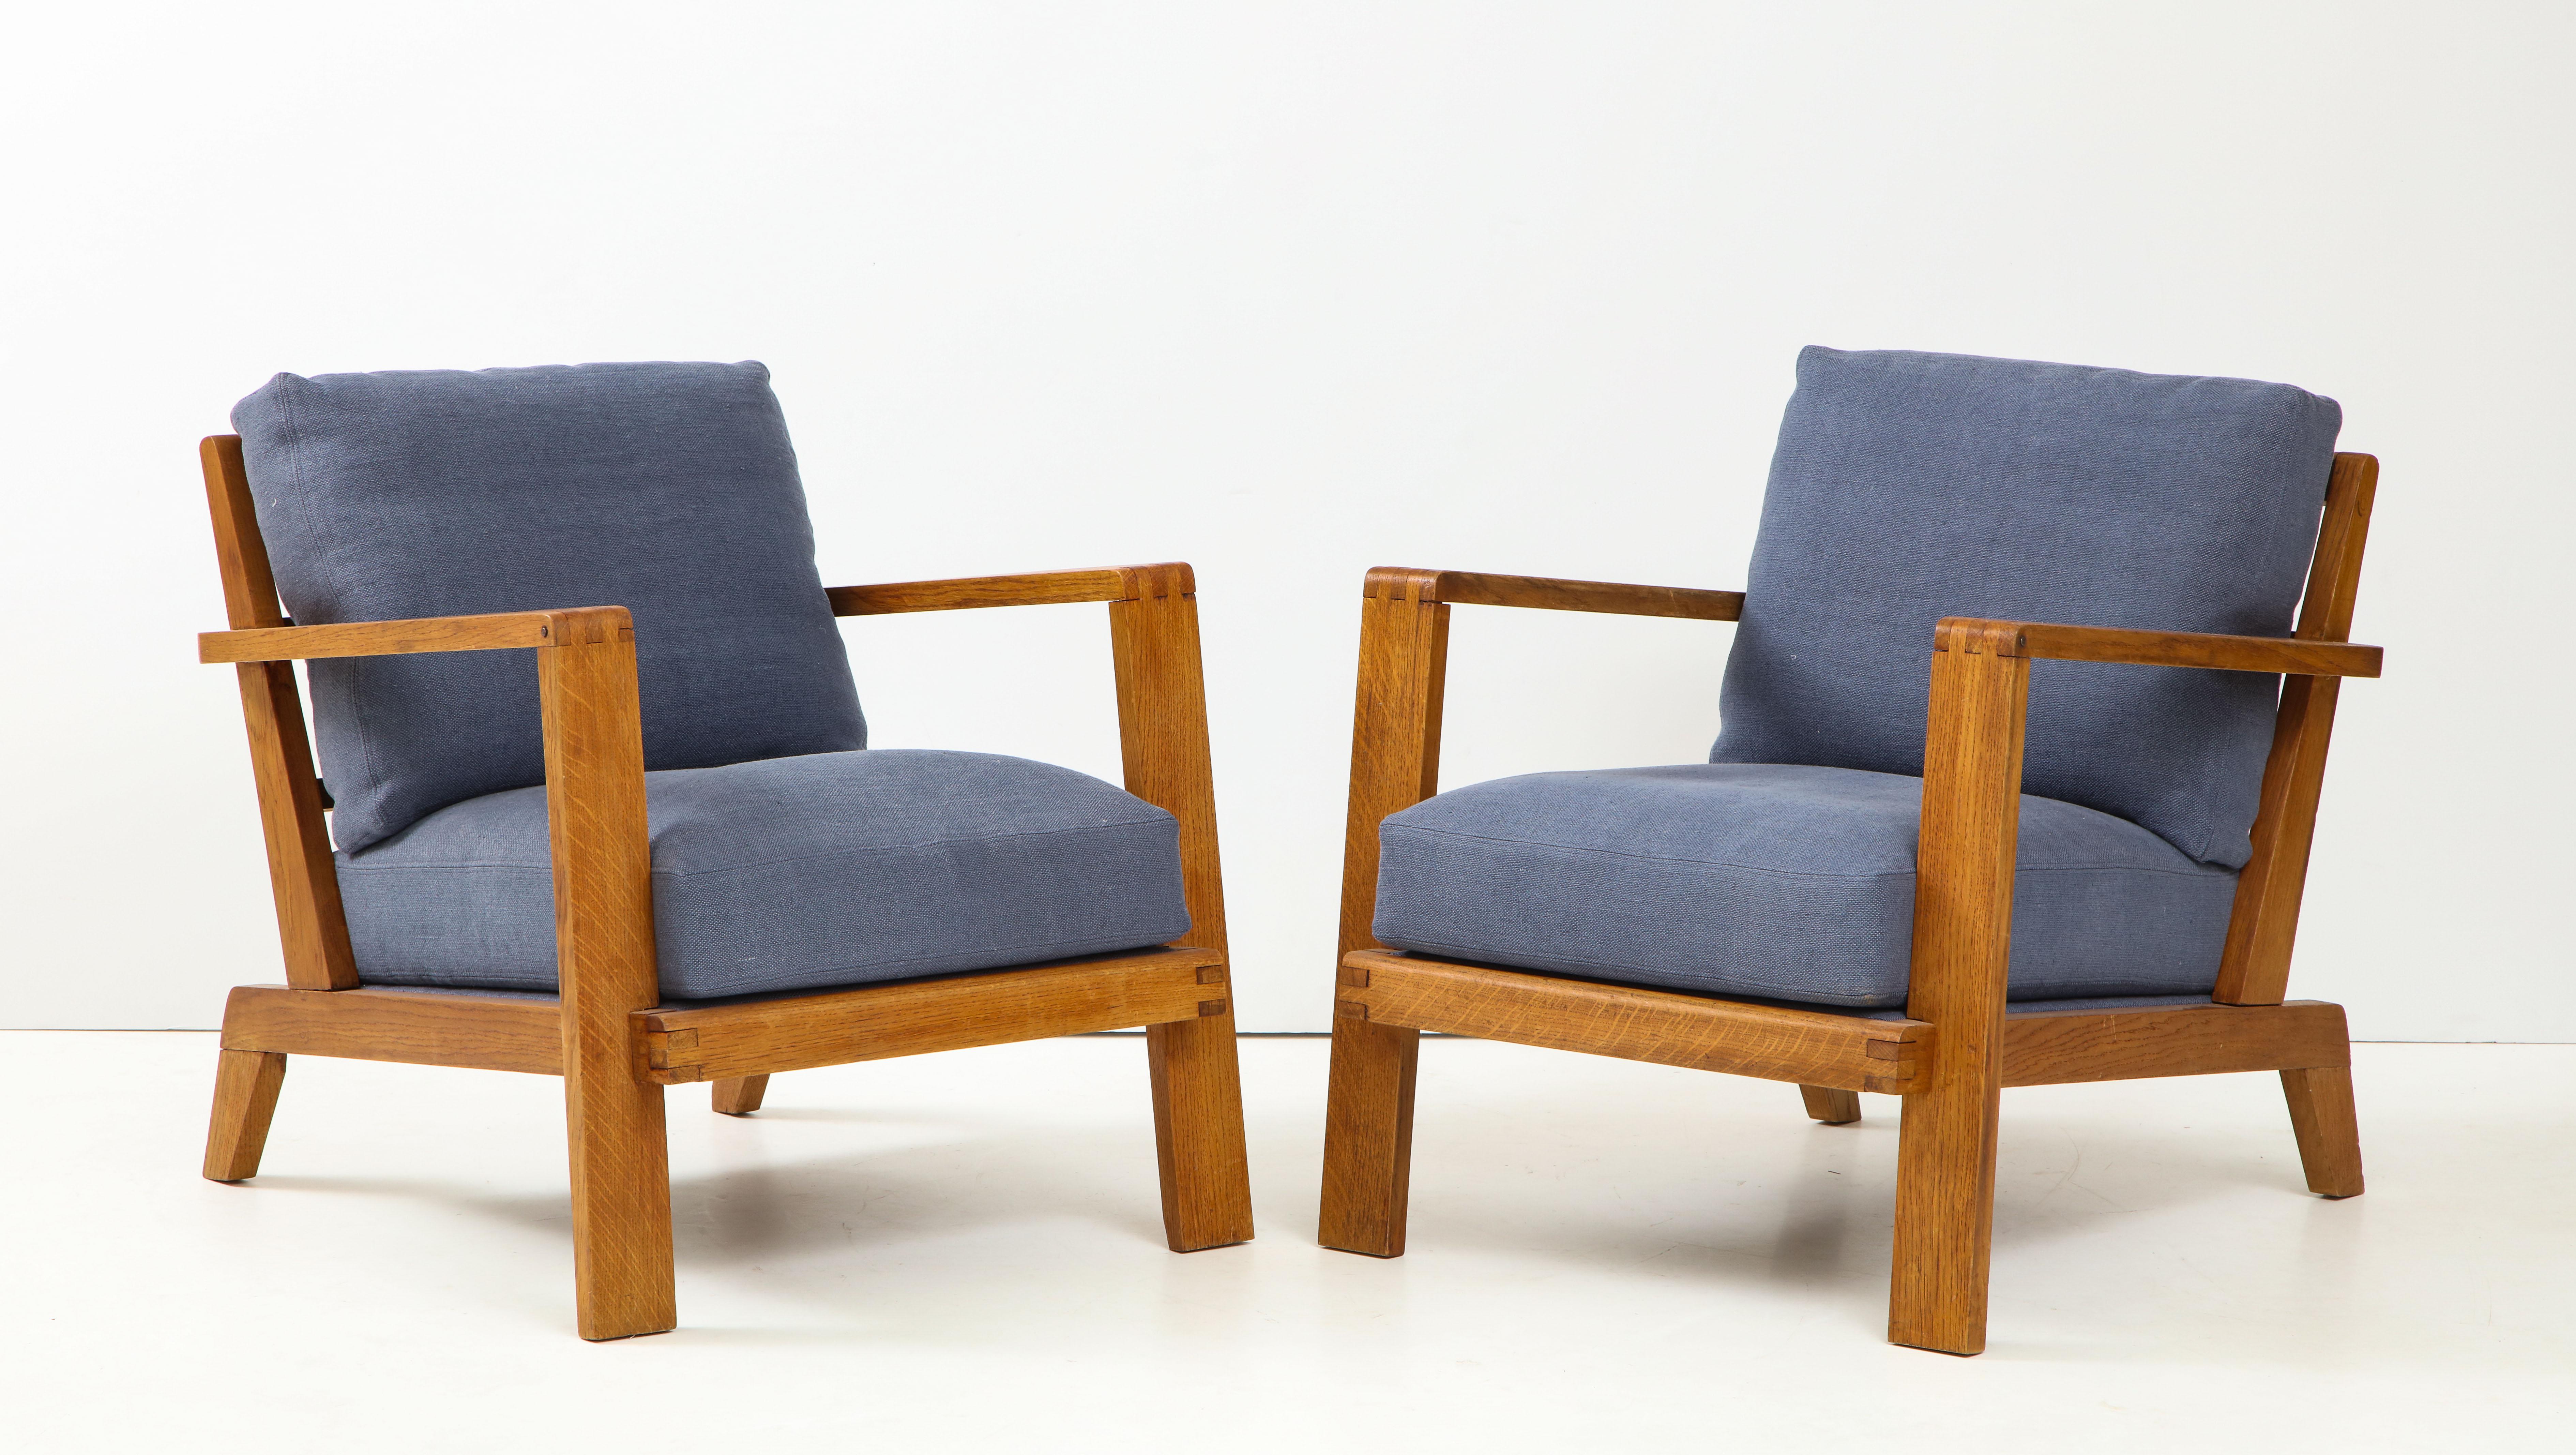 Handsome pair of mid-century armchairs by René Gabriel, Paris, France, circa 1945. 

Excellent design consists of a sturdy oak frame, angular arms and recessed legs, an attractive gridded backrest, as well as brand new upholstery in a blue linen